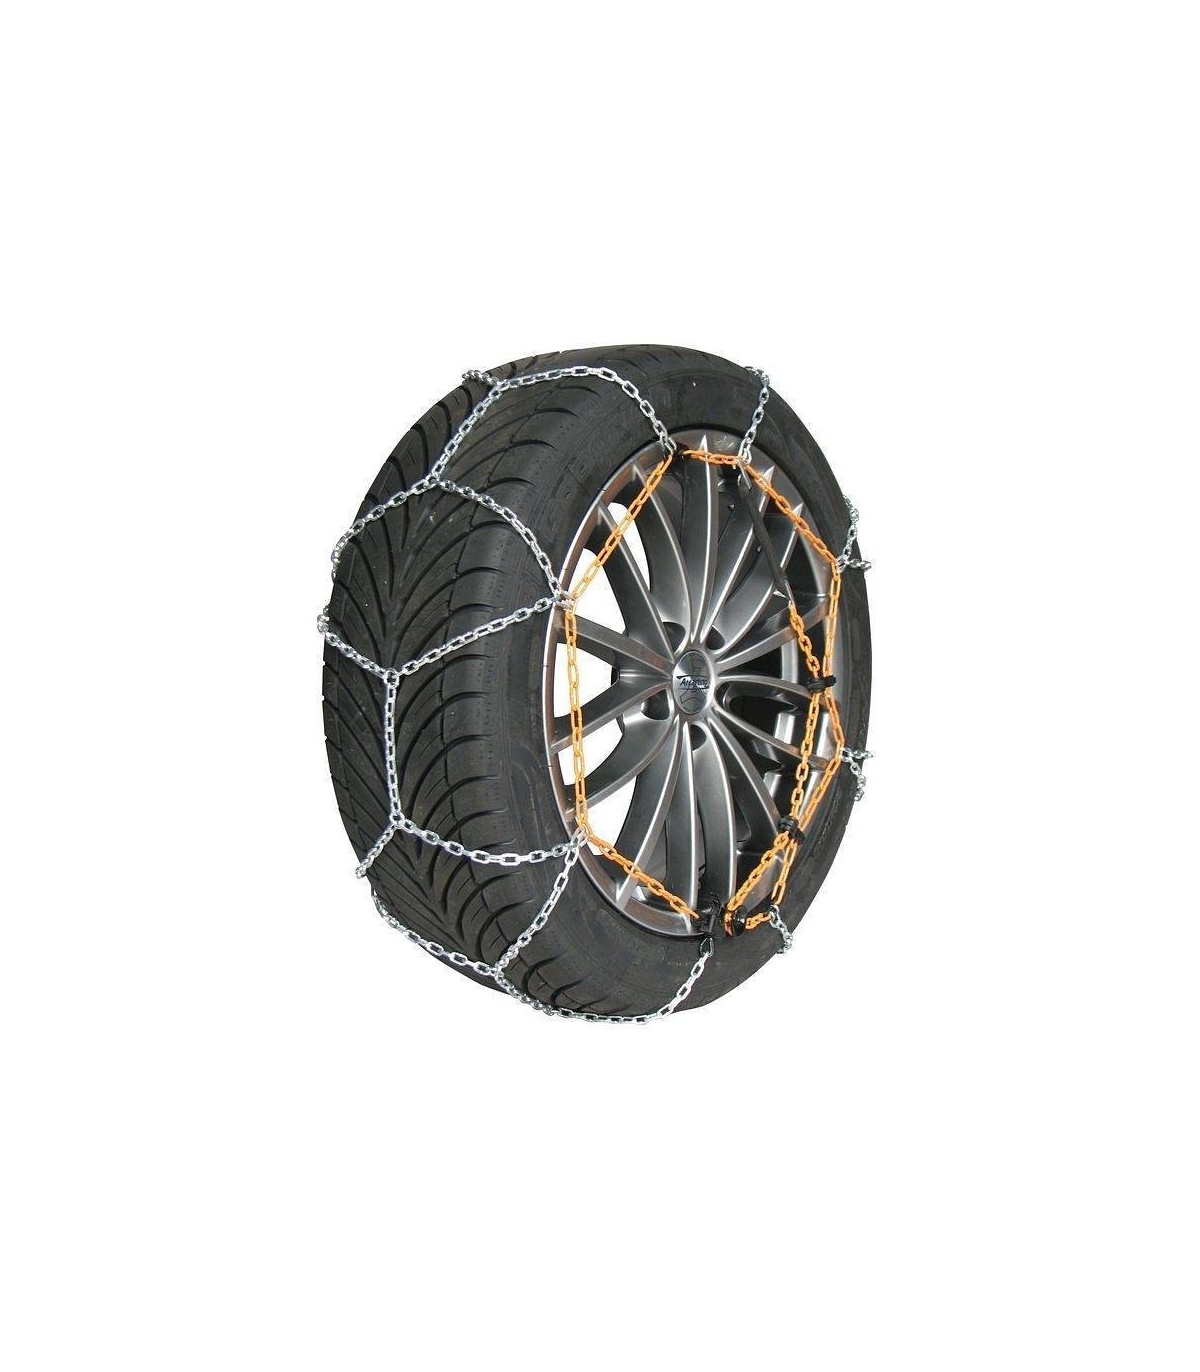 Goodyear GODKN090 - Chaines Neige, 9mm. E-9 NEO, taille 90 pour les mesures  de pneus: 195/80R14, 205/70R14, 205/80R14, 180/80R15, 185/80R15, 195/70R15,  205/65R15, 215/60R15, 195/65R16, 205/55R16, 215/50R16, 225/40R16,  205/50R17, 235/45R17 - Comparer